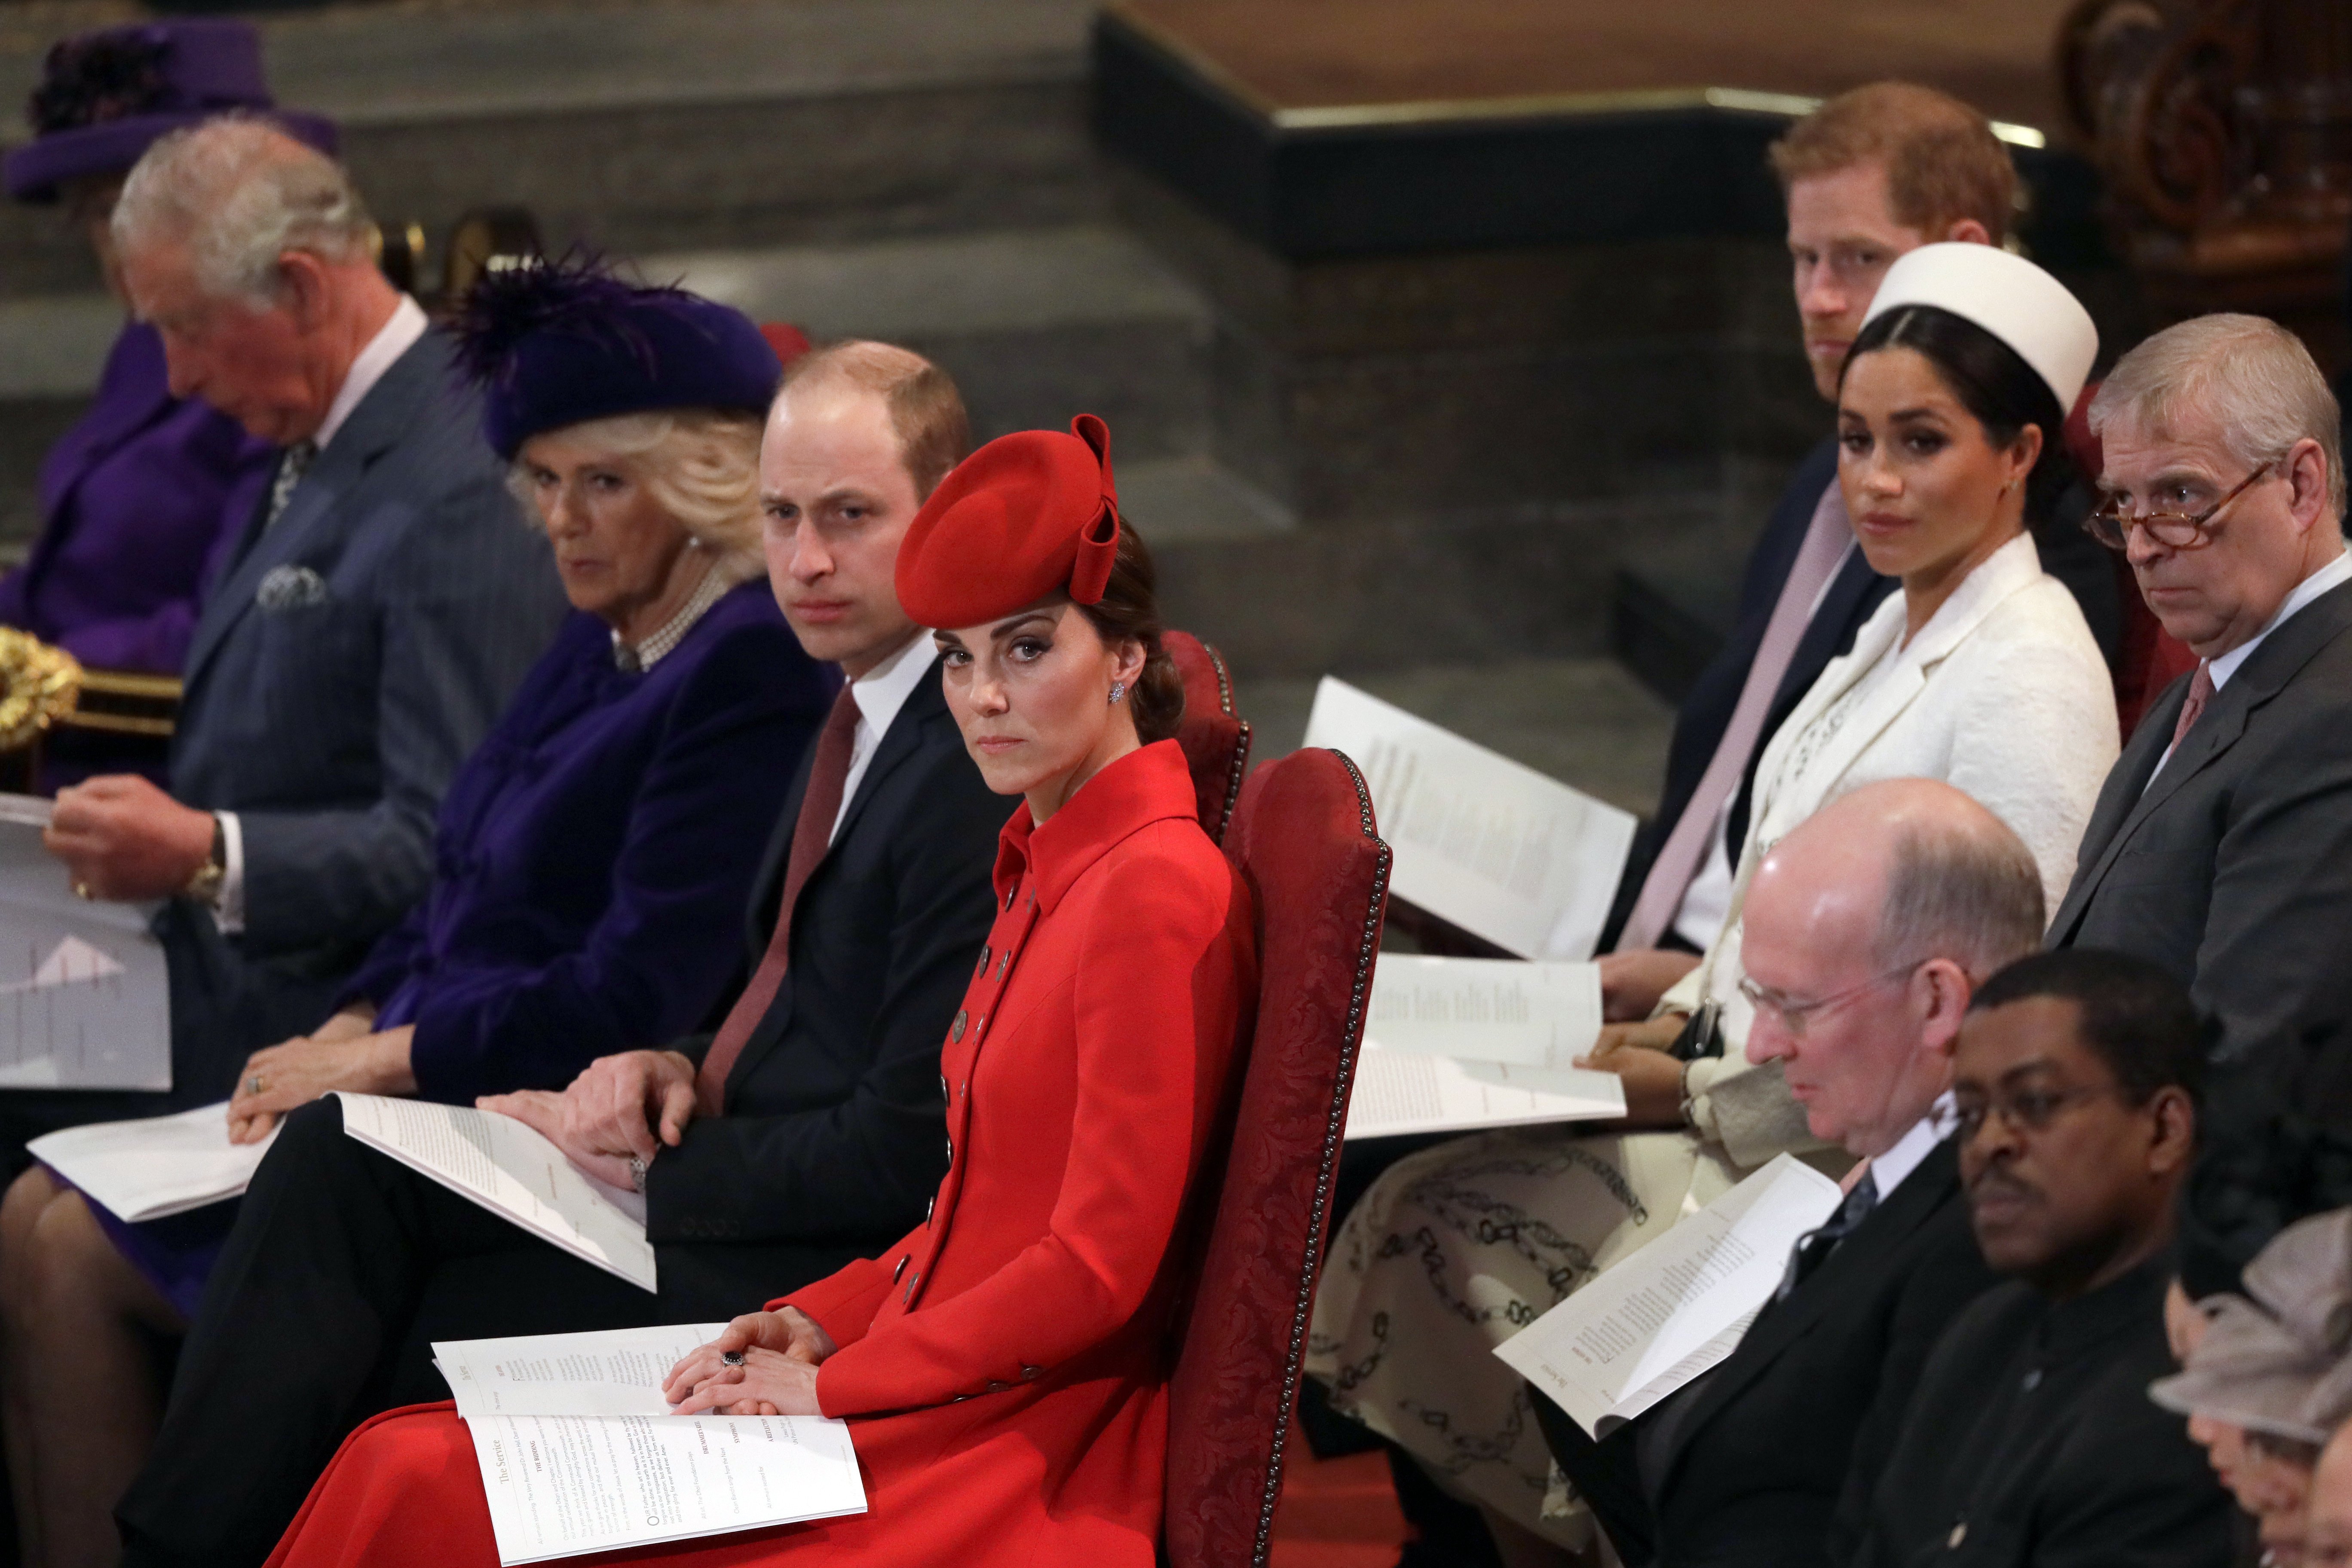 Kate Middleton and Meghan Markle with Prince William, Prince Harry, Camilla Parker-Bowles, Prince Charles and Prince Andrew at the Commonwealth Service at Westminster Abbey in London, England | Photo: Getty Images